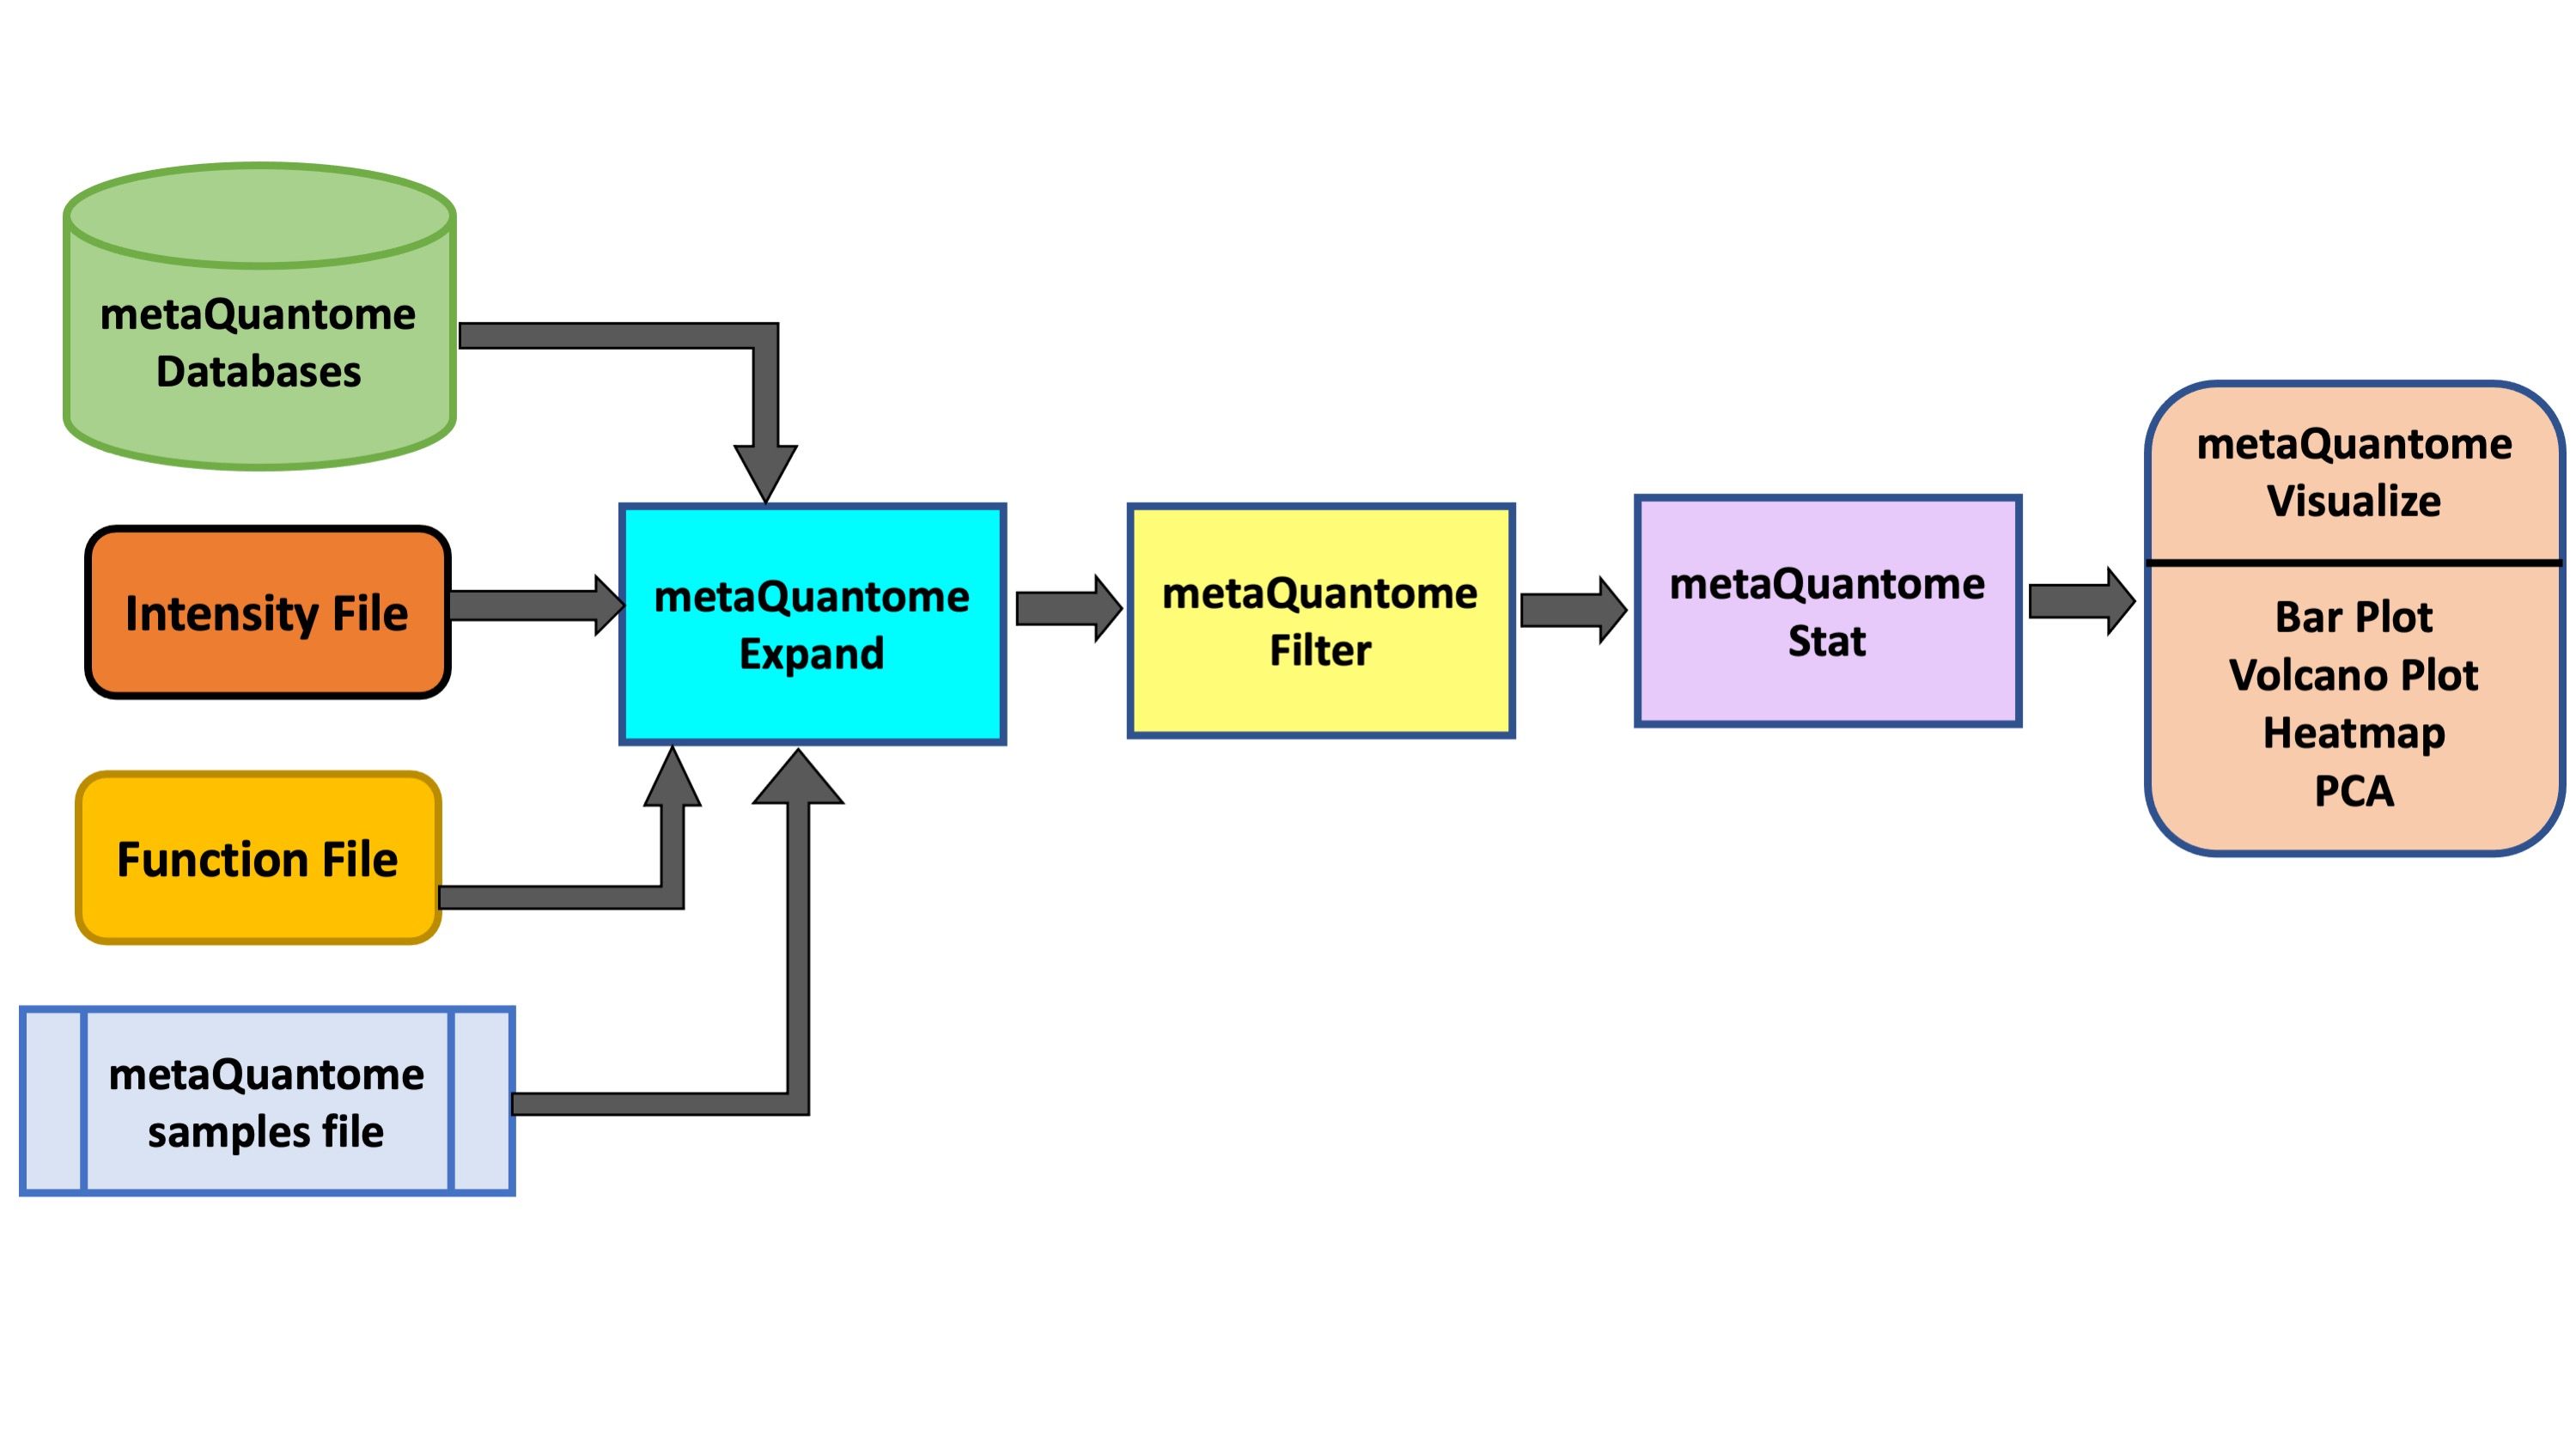 MetaQuantome-function-workflow. 